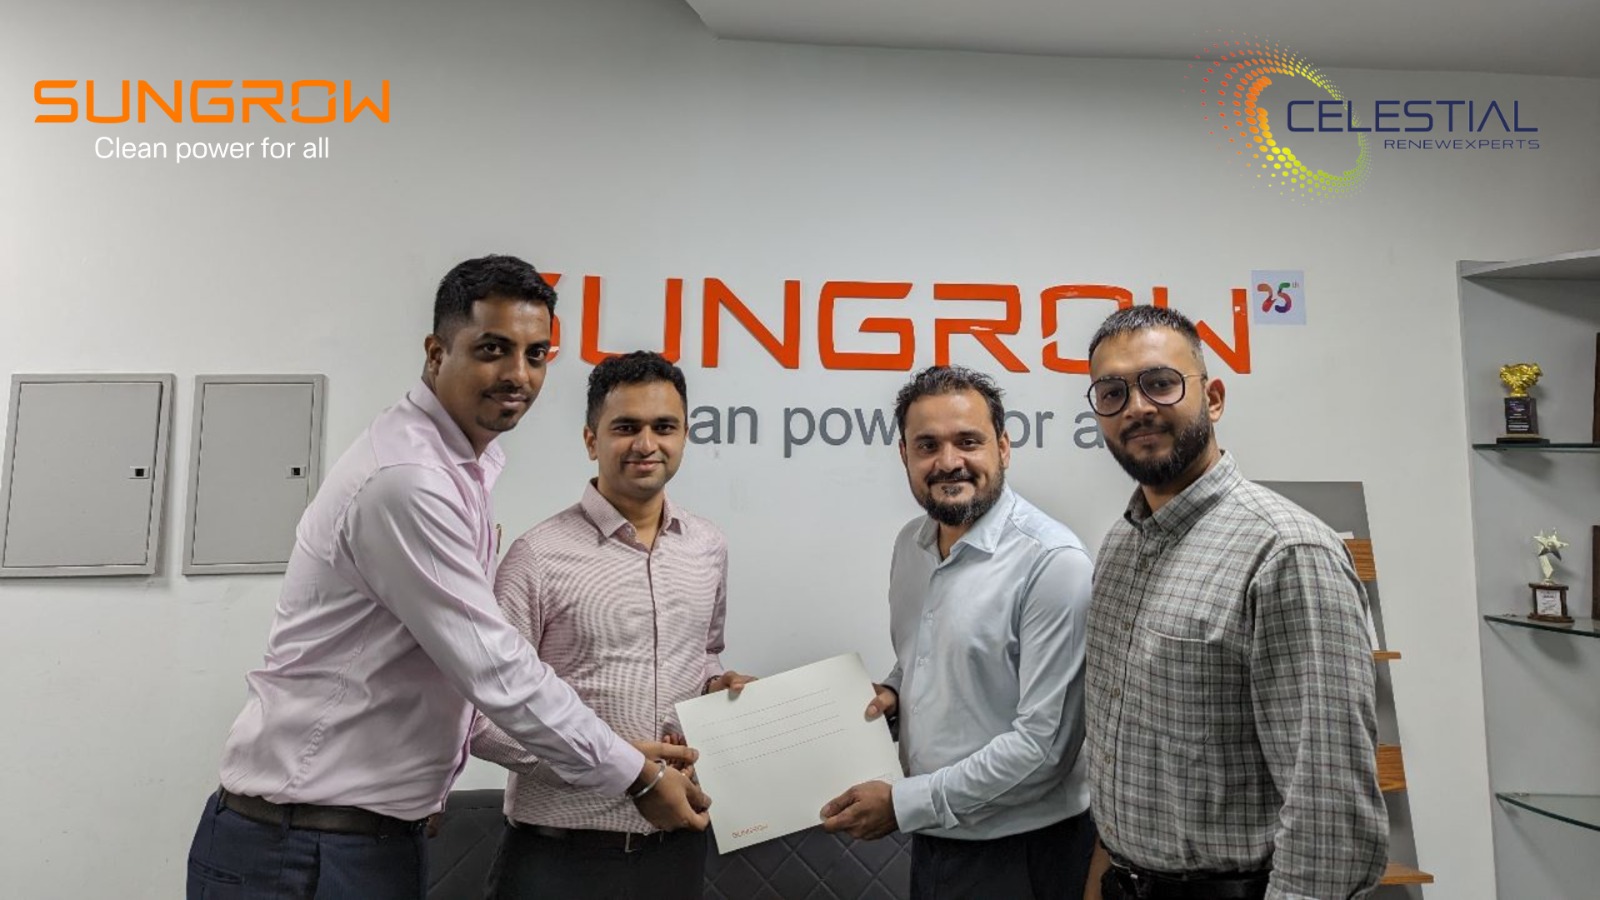 Sungrow Signs Celestial Renewexperts as its Distributor in different states of South India – EQ Mag